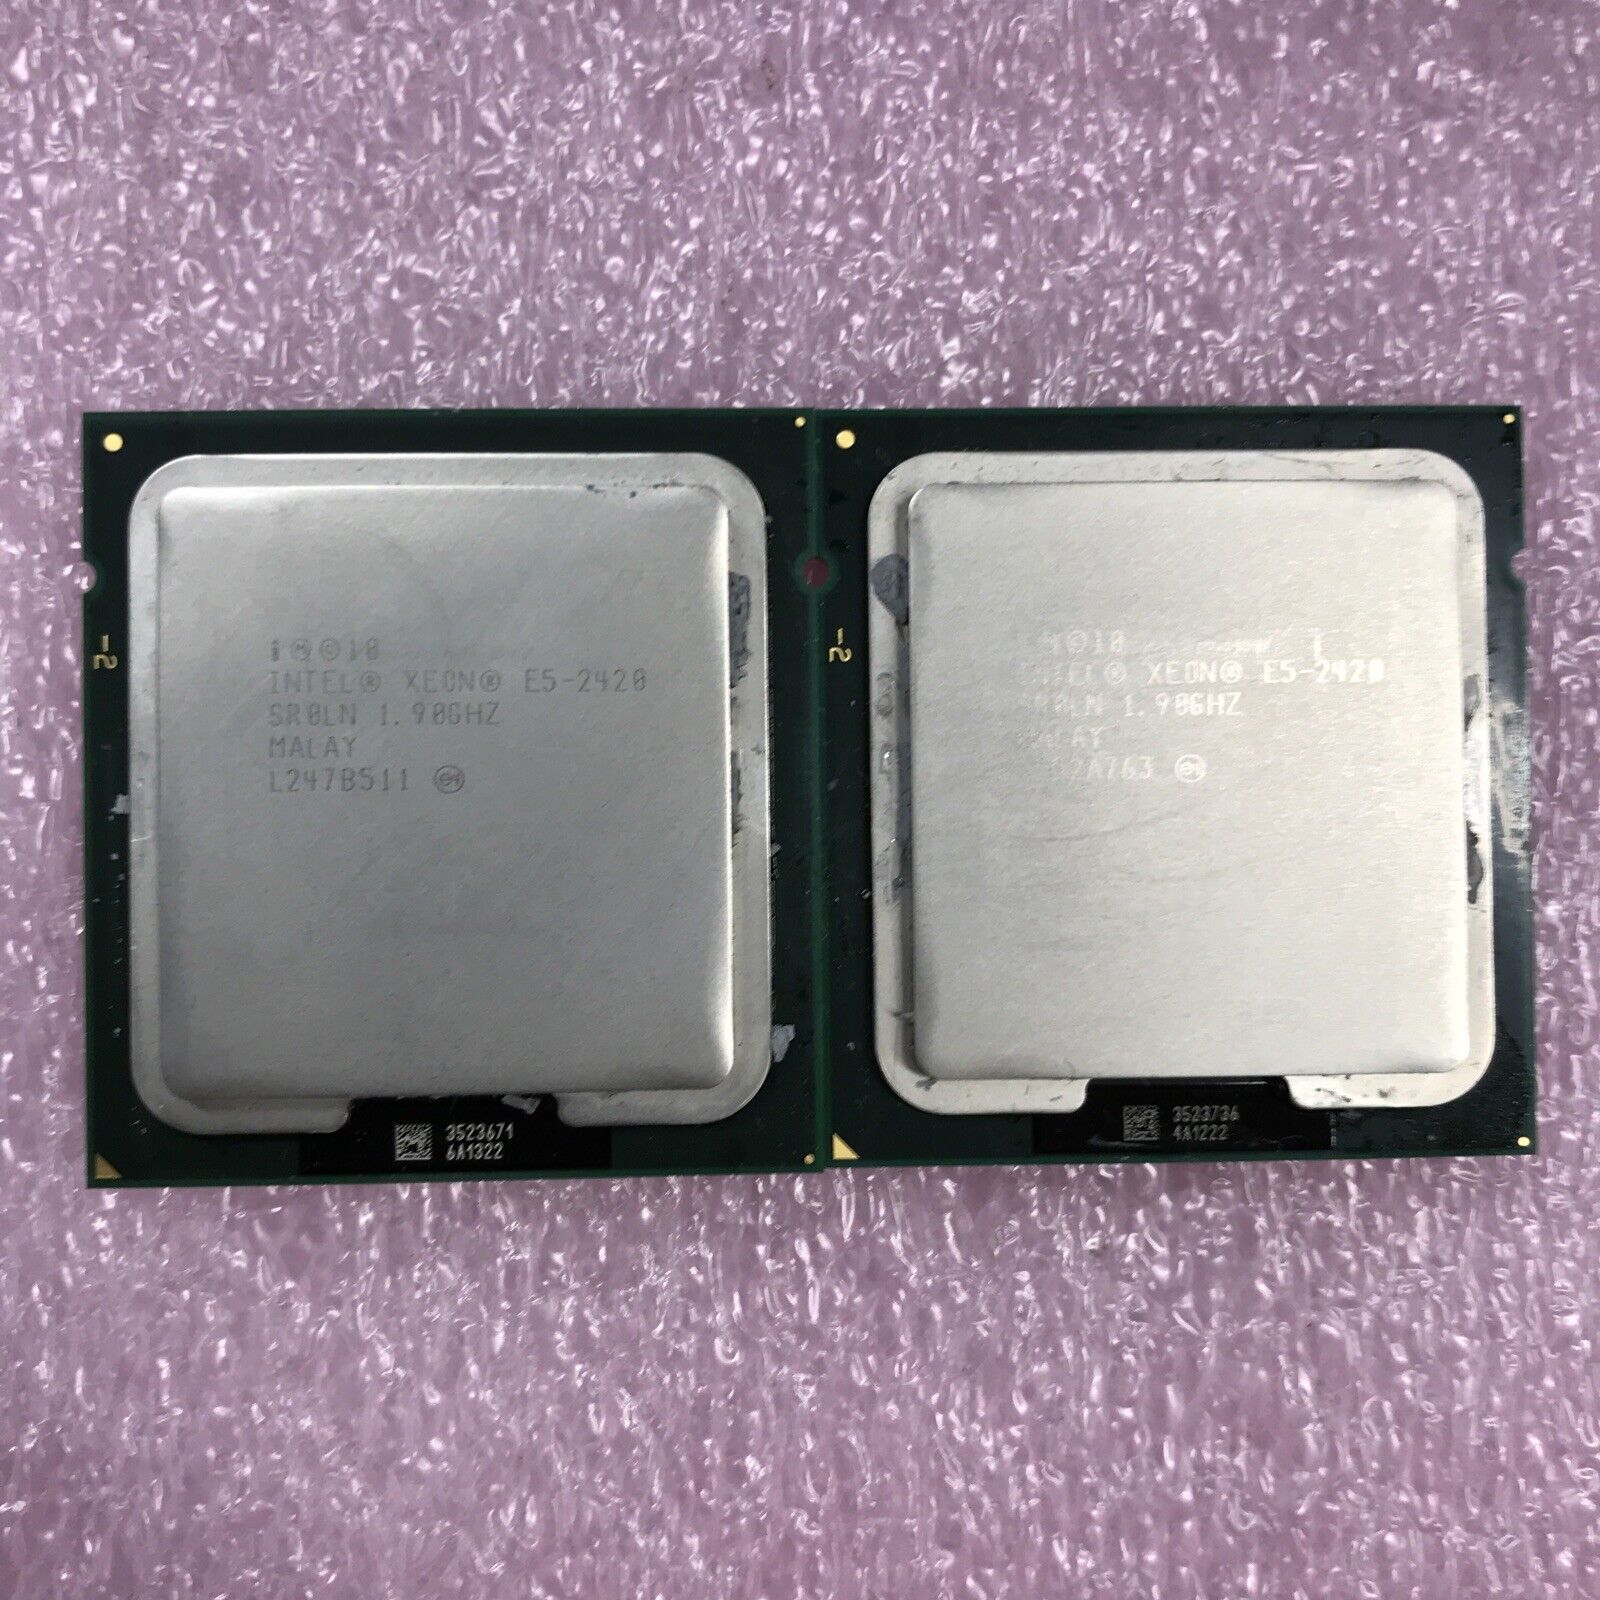 (Lot of 2) Intel Xeon E5-2420 SR0LN 1.9GHz (Tested and Working)